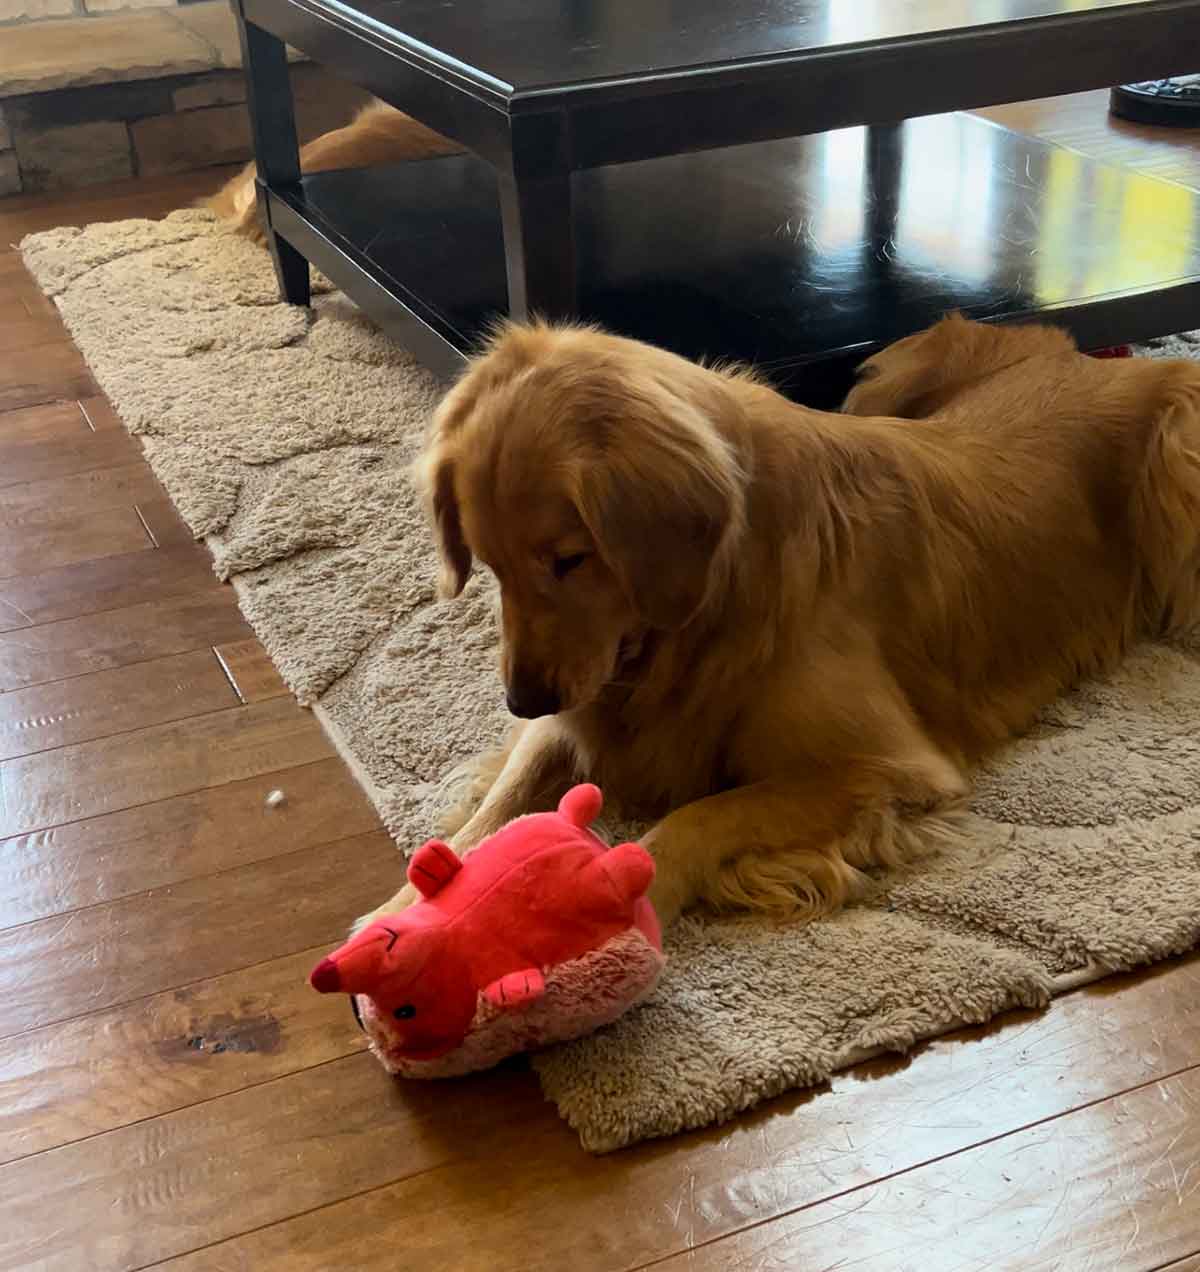 Dog on the floor playing with a pink stuffed dog toy.